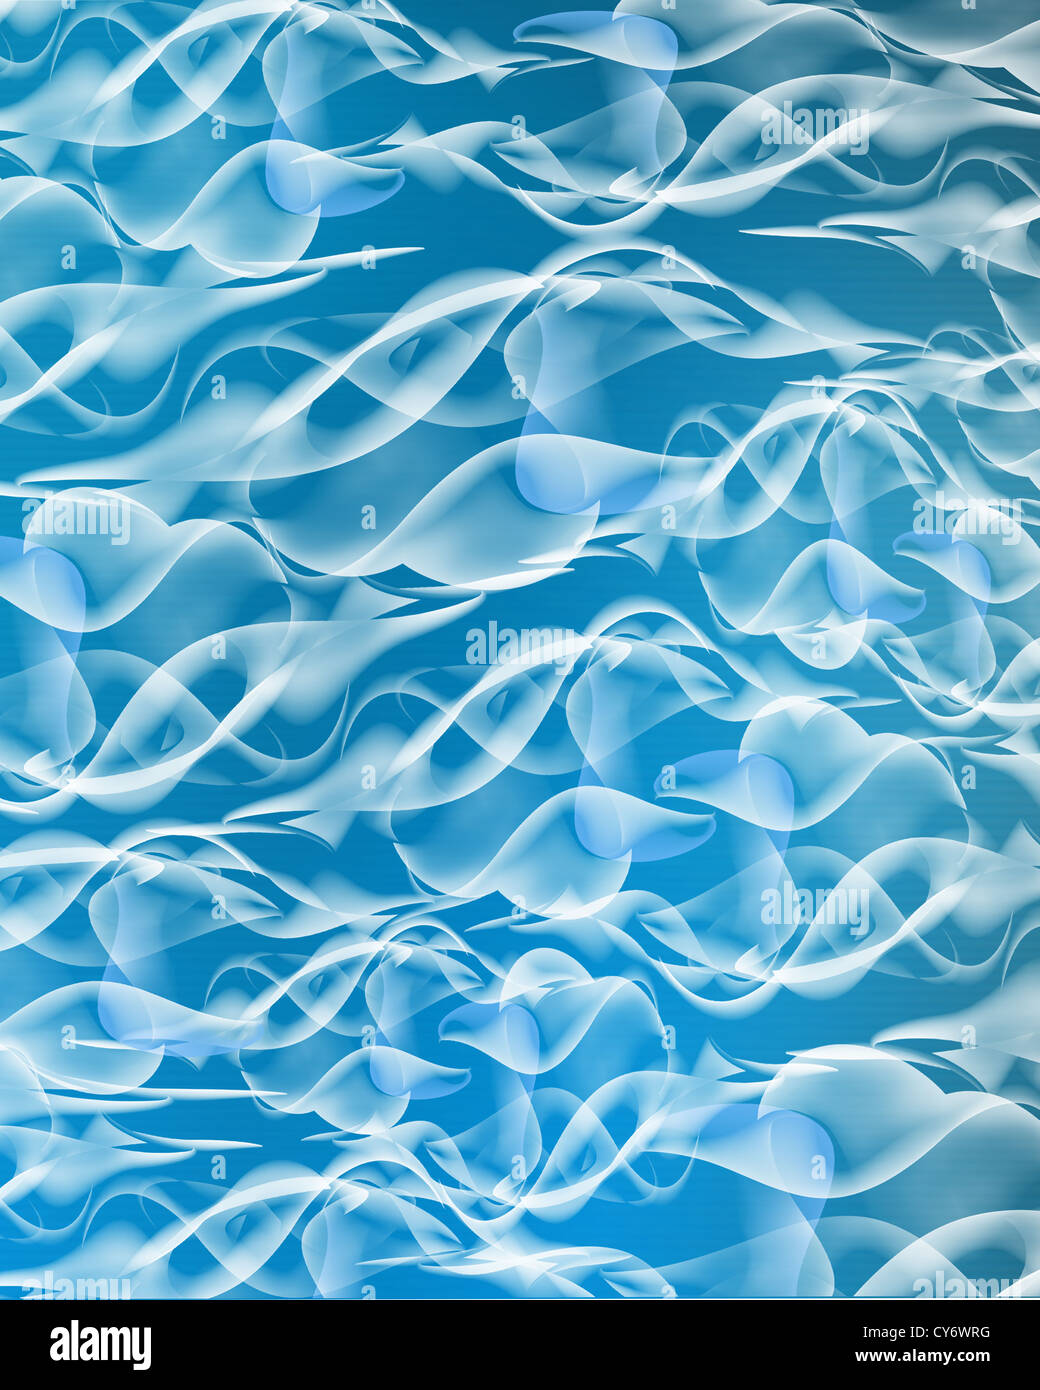 water blue abstract background Stock Photo